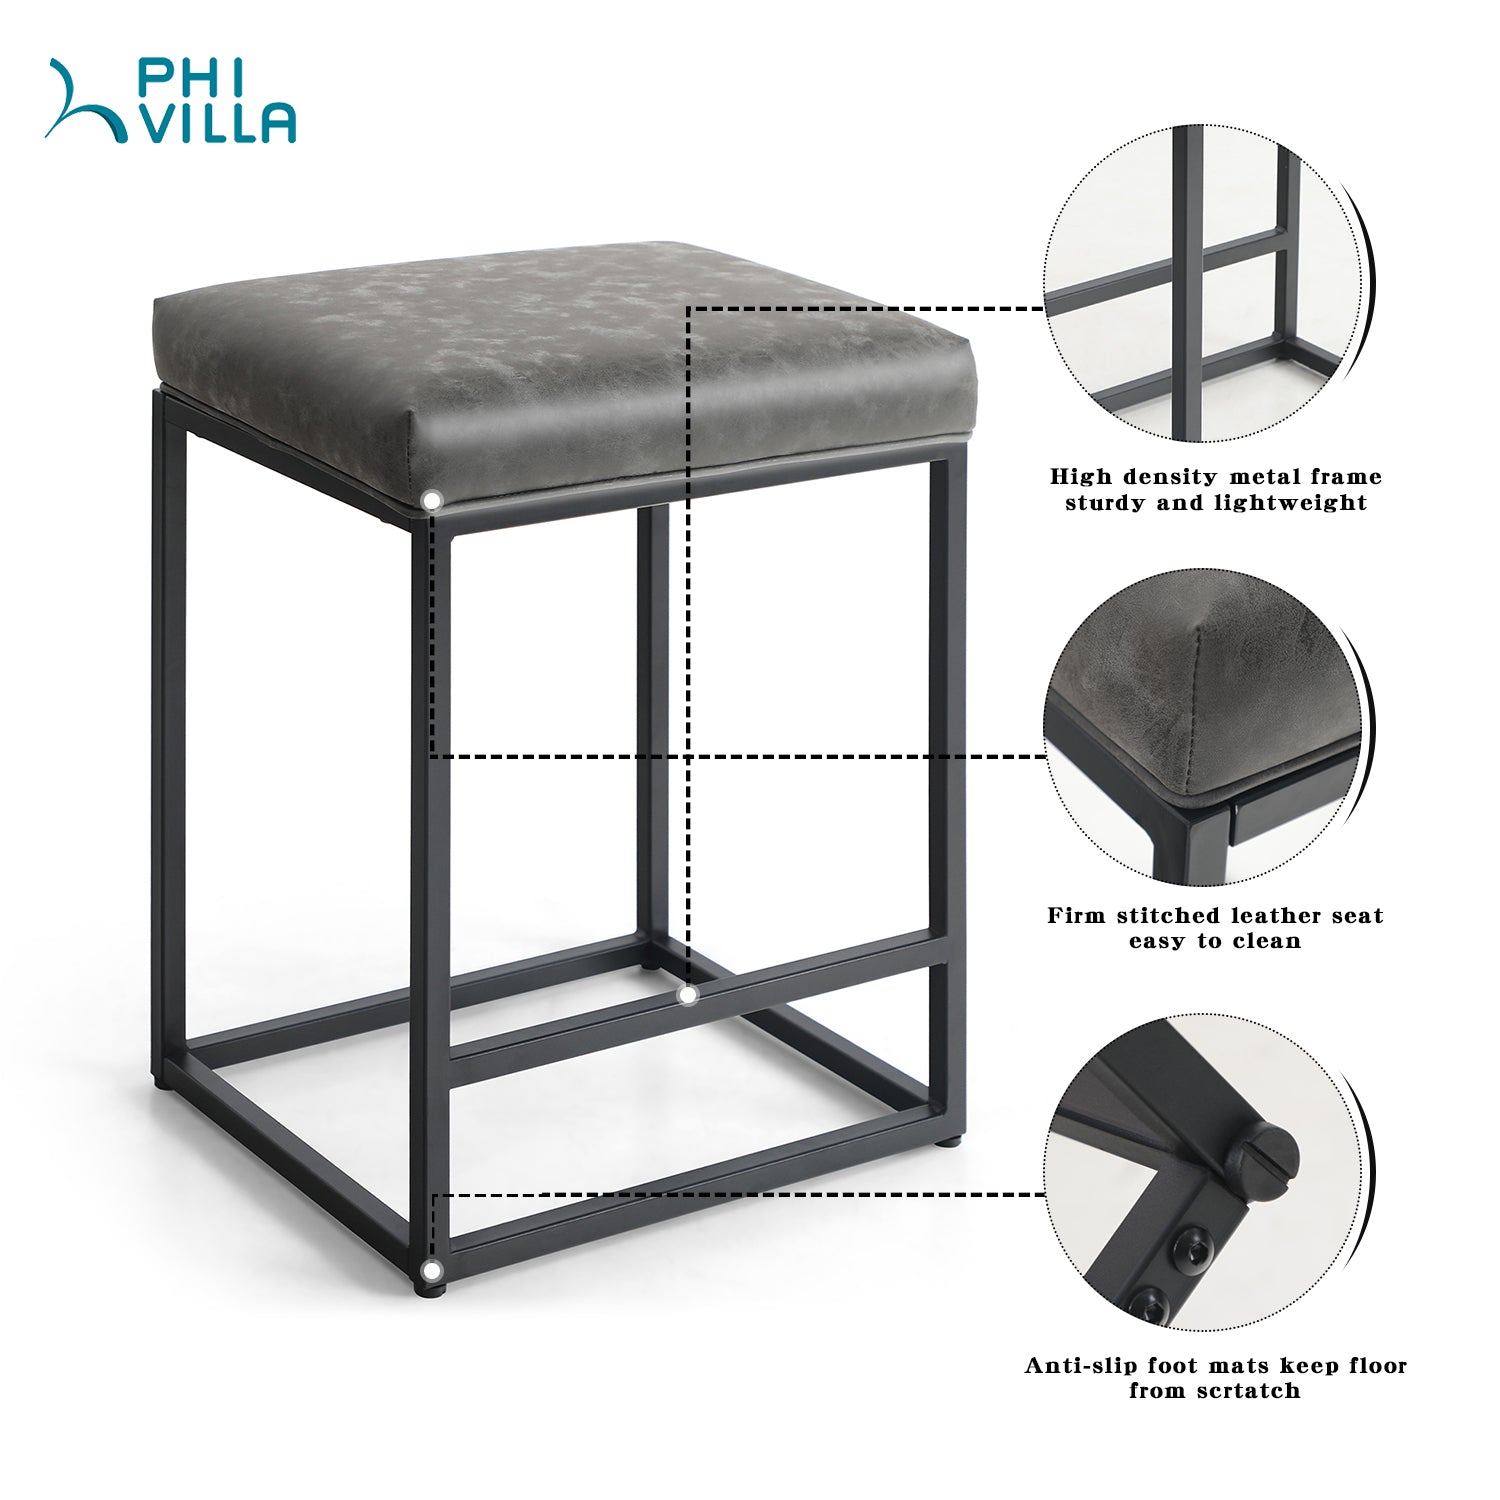 PHI VILLA Square PU Leather Bar Stool with Sturdy Metal Frame, Set of 2